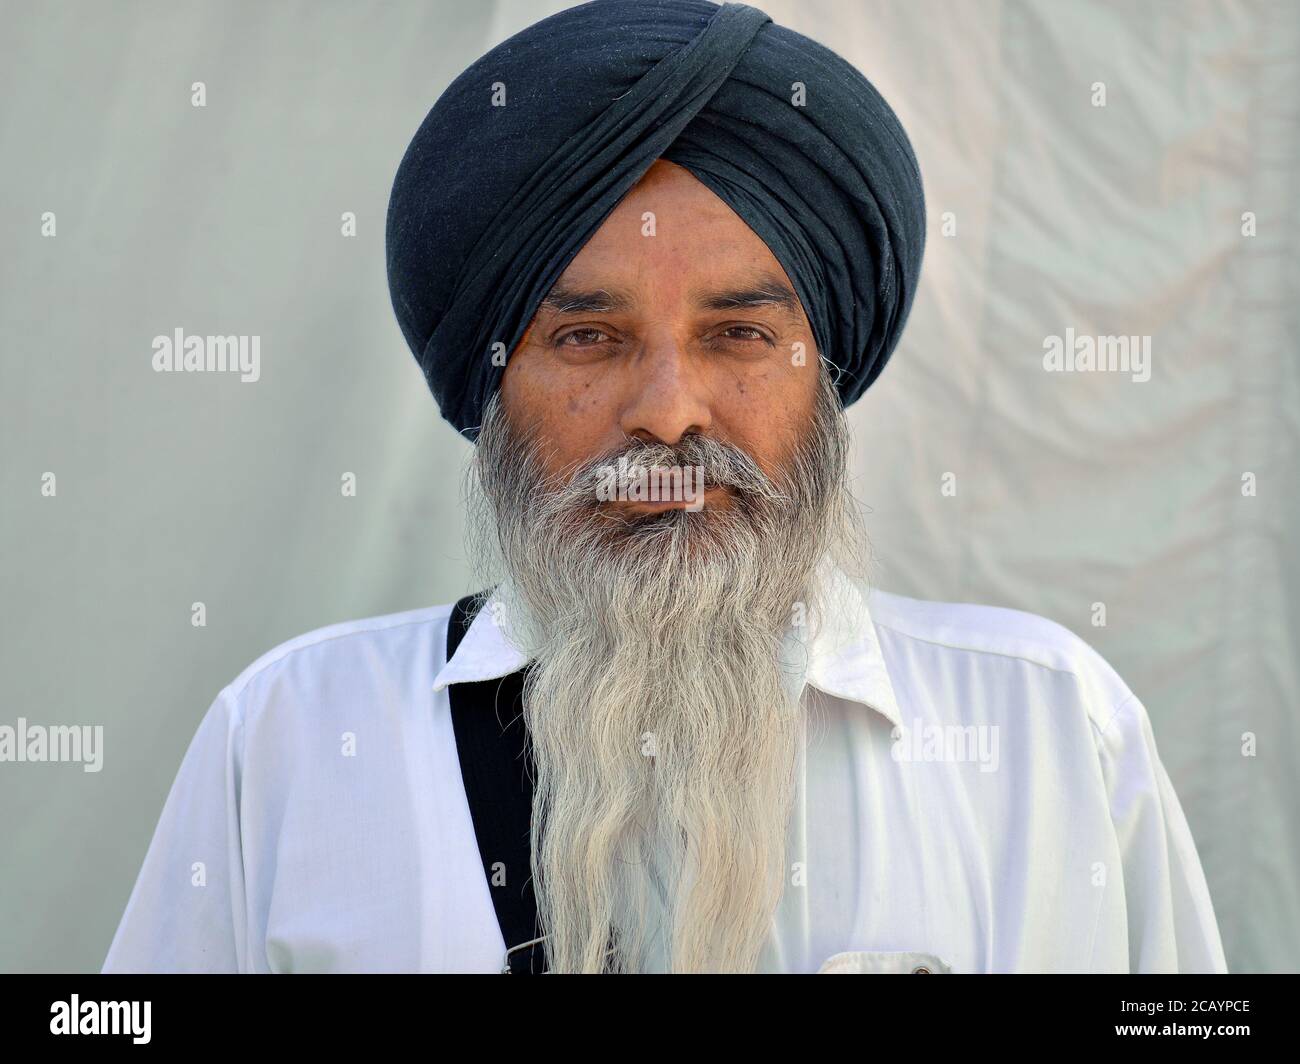 Middle-aged Indian Sikh devotee with black turban (dastar) and long beard poses for the camera. Stock Photo